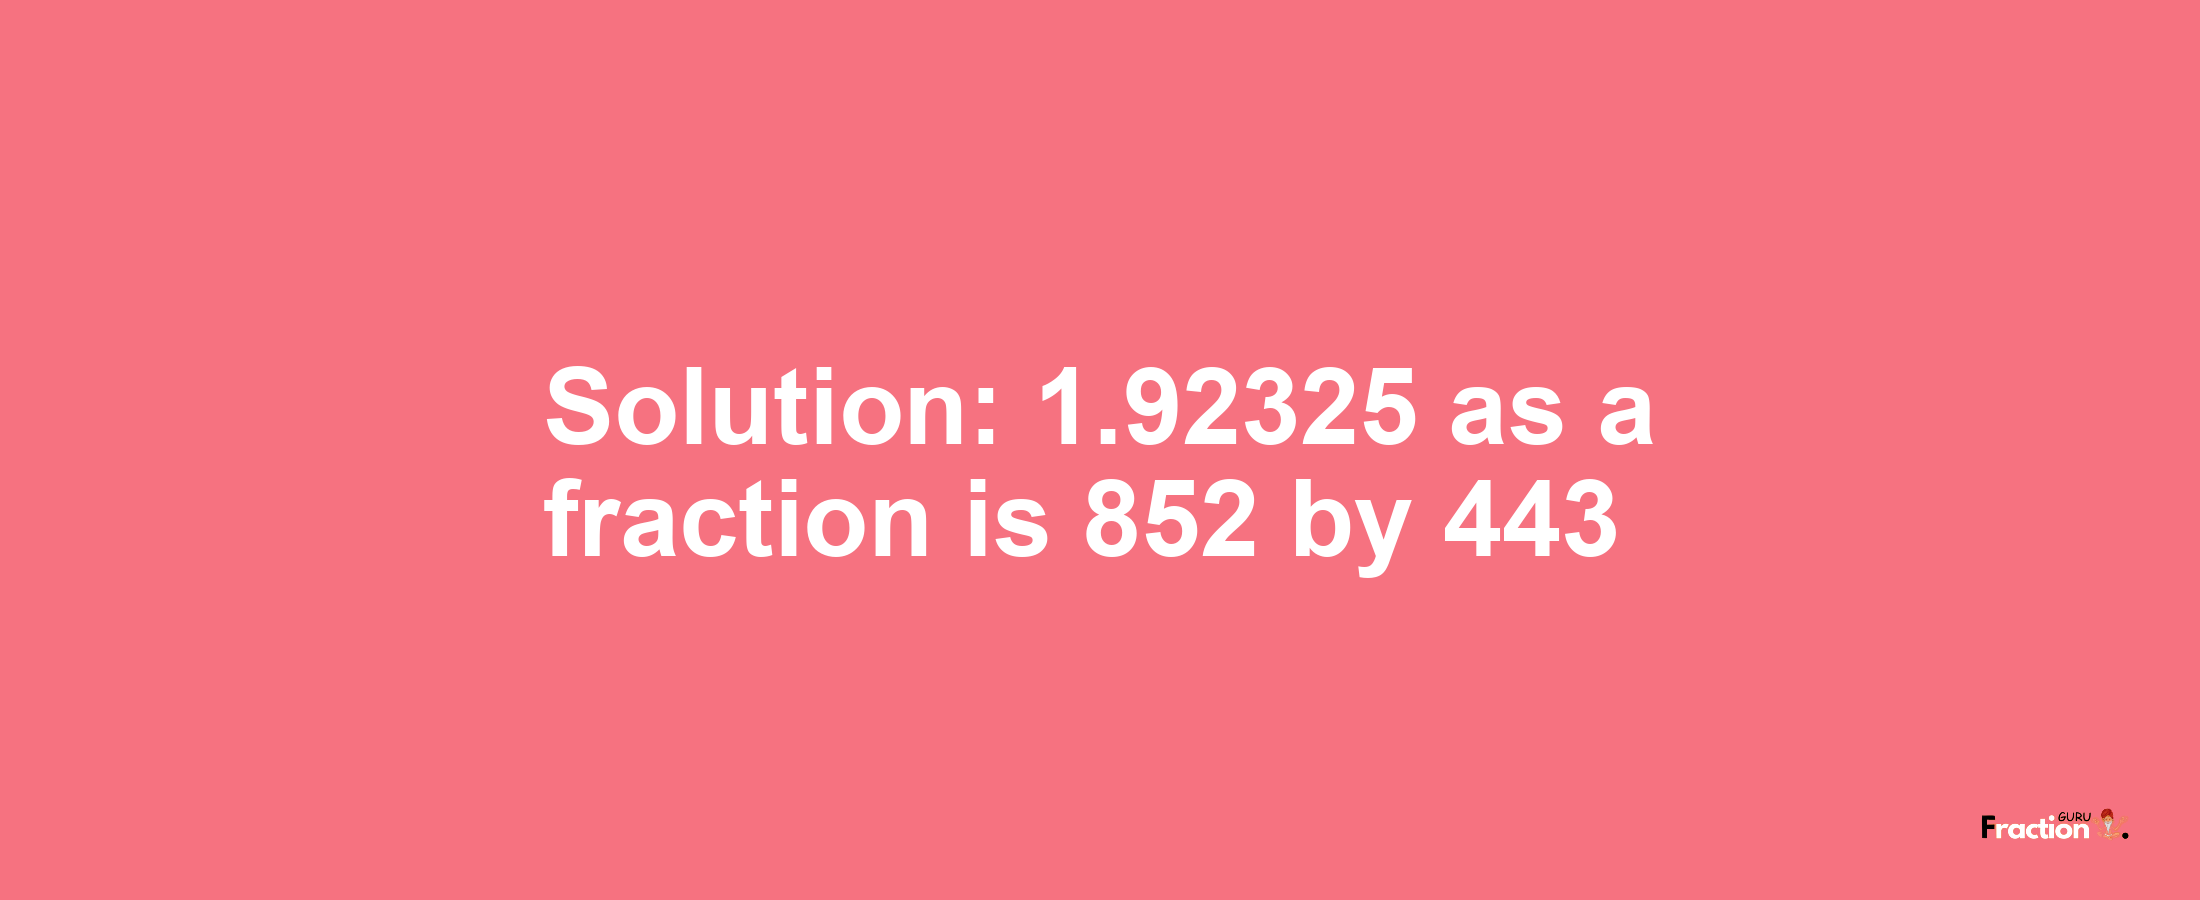 Solution:1.92325 as a fraction is 852/443